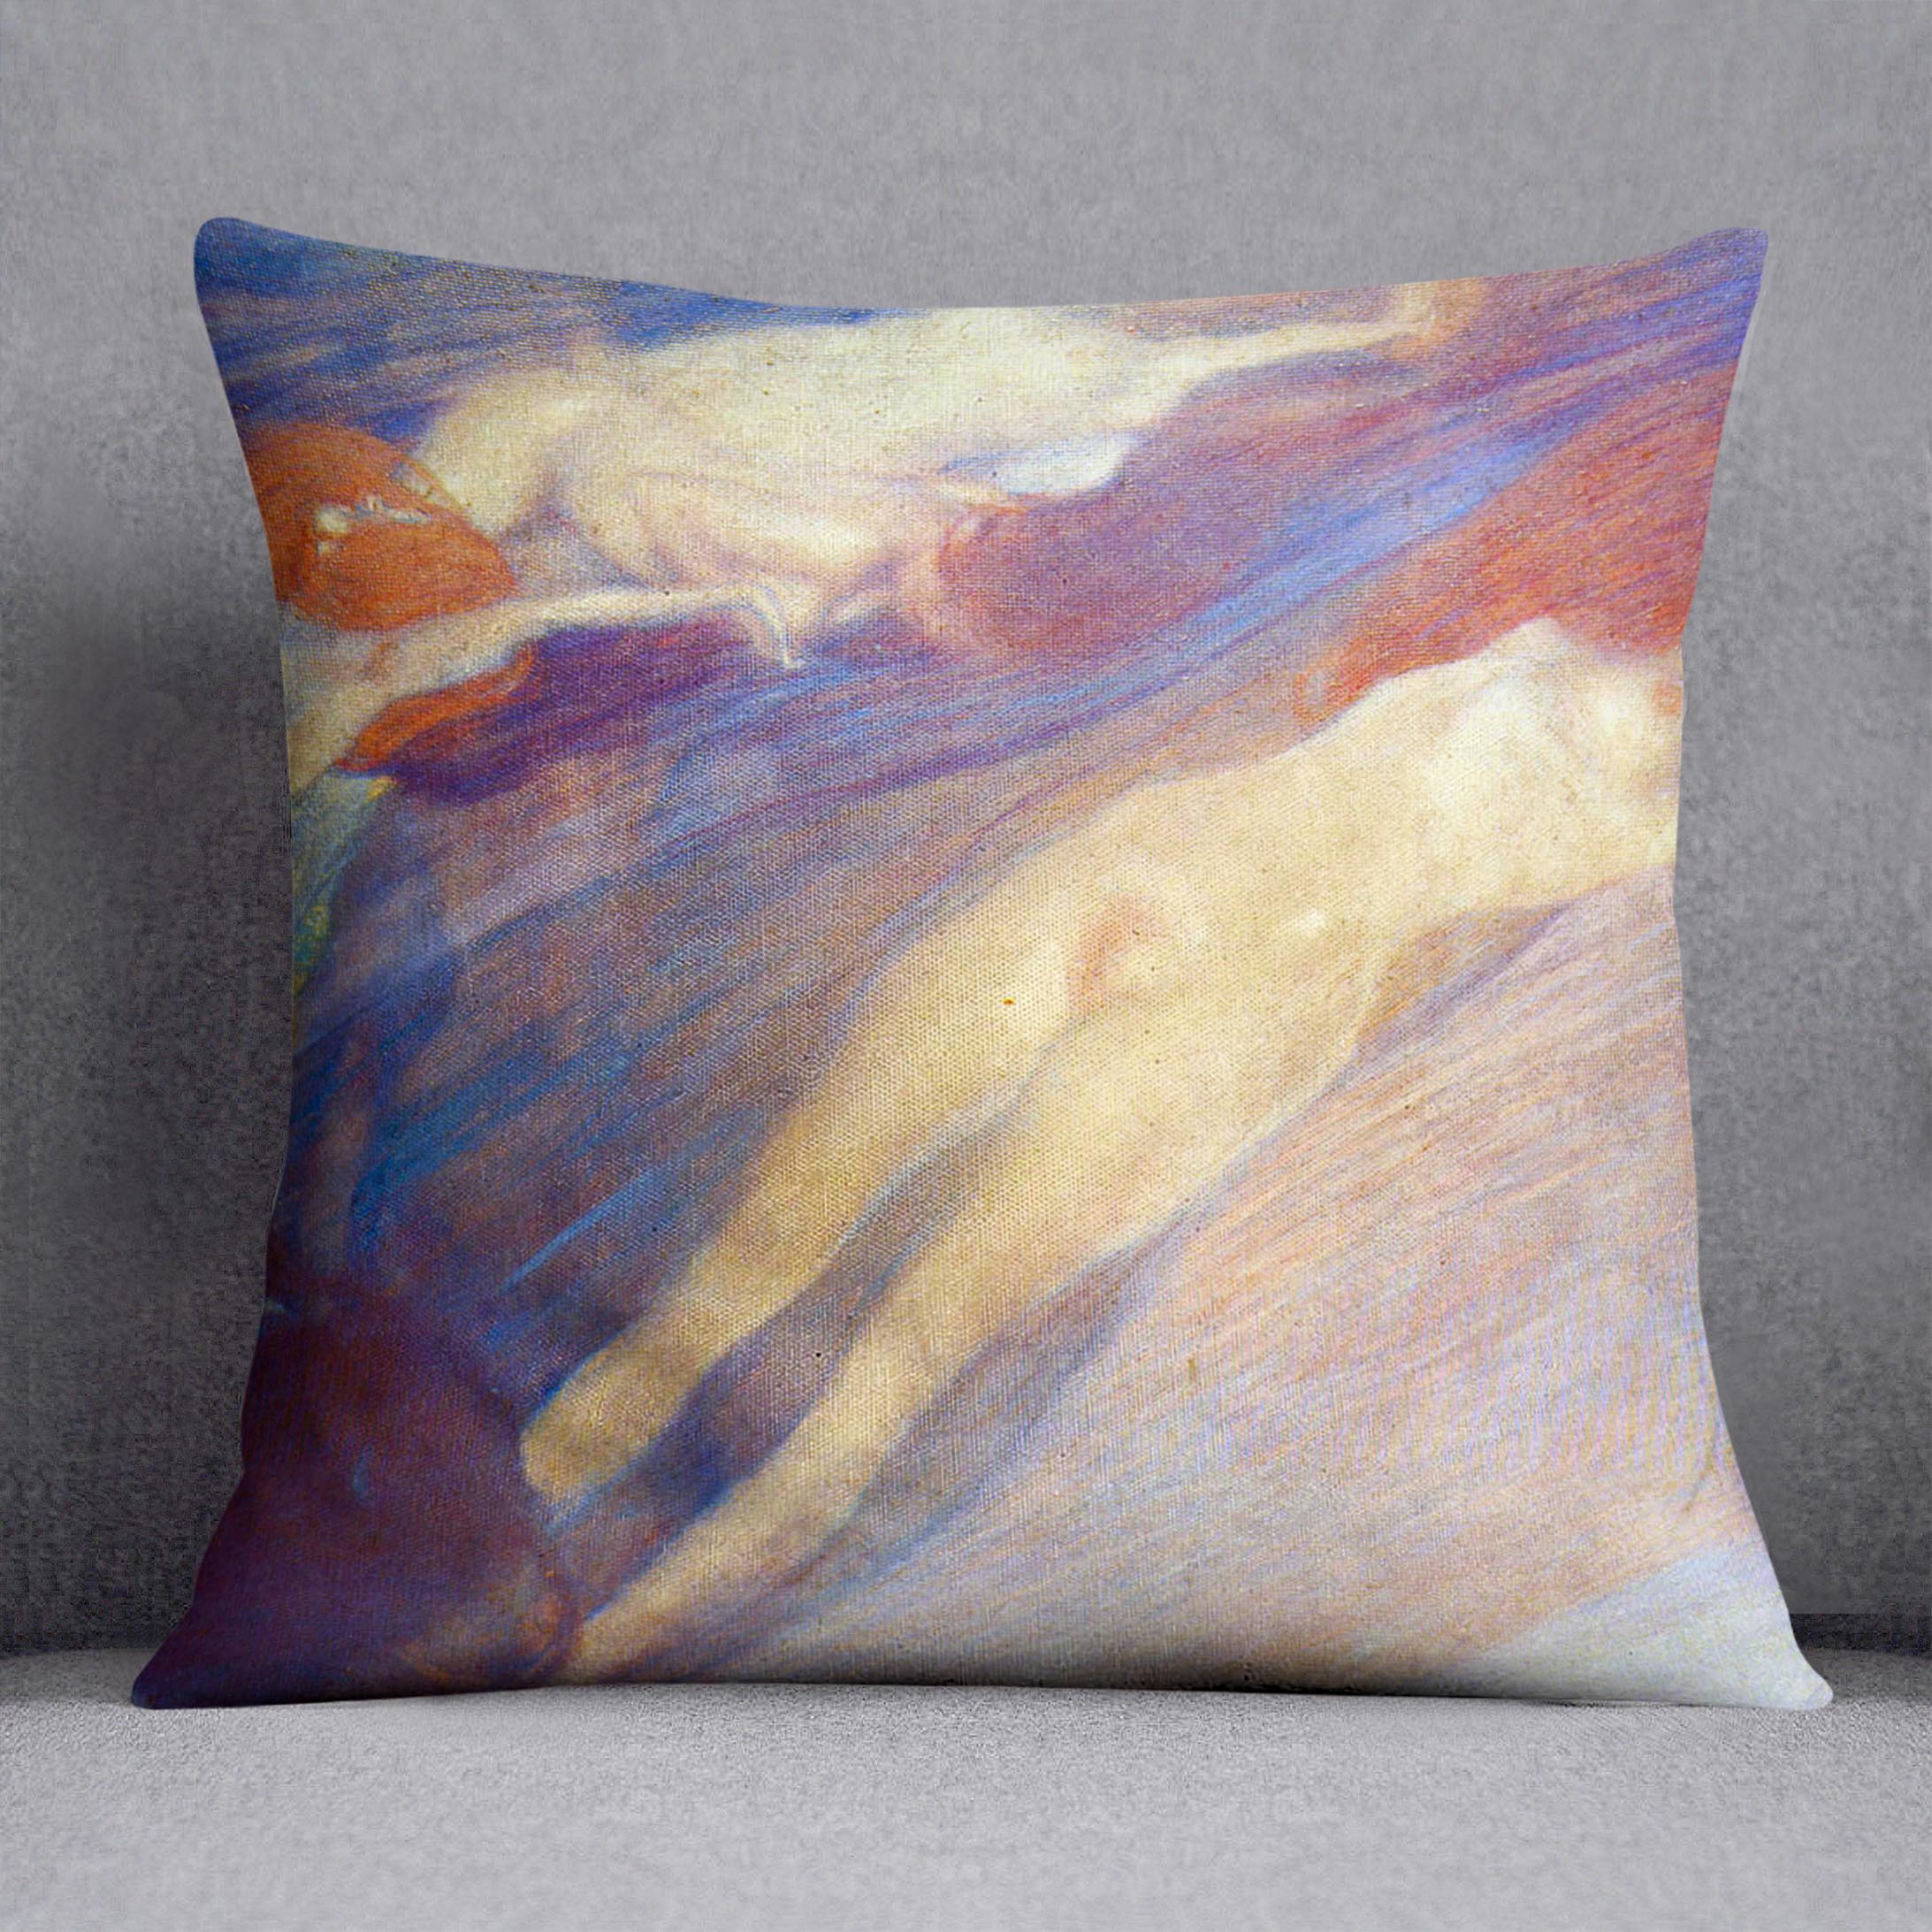 Moving water by Klimt Cushion